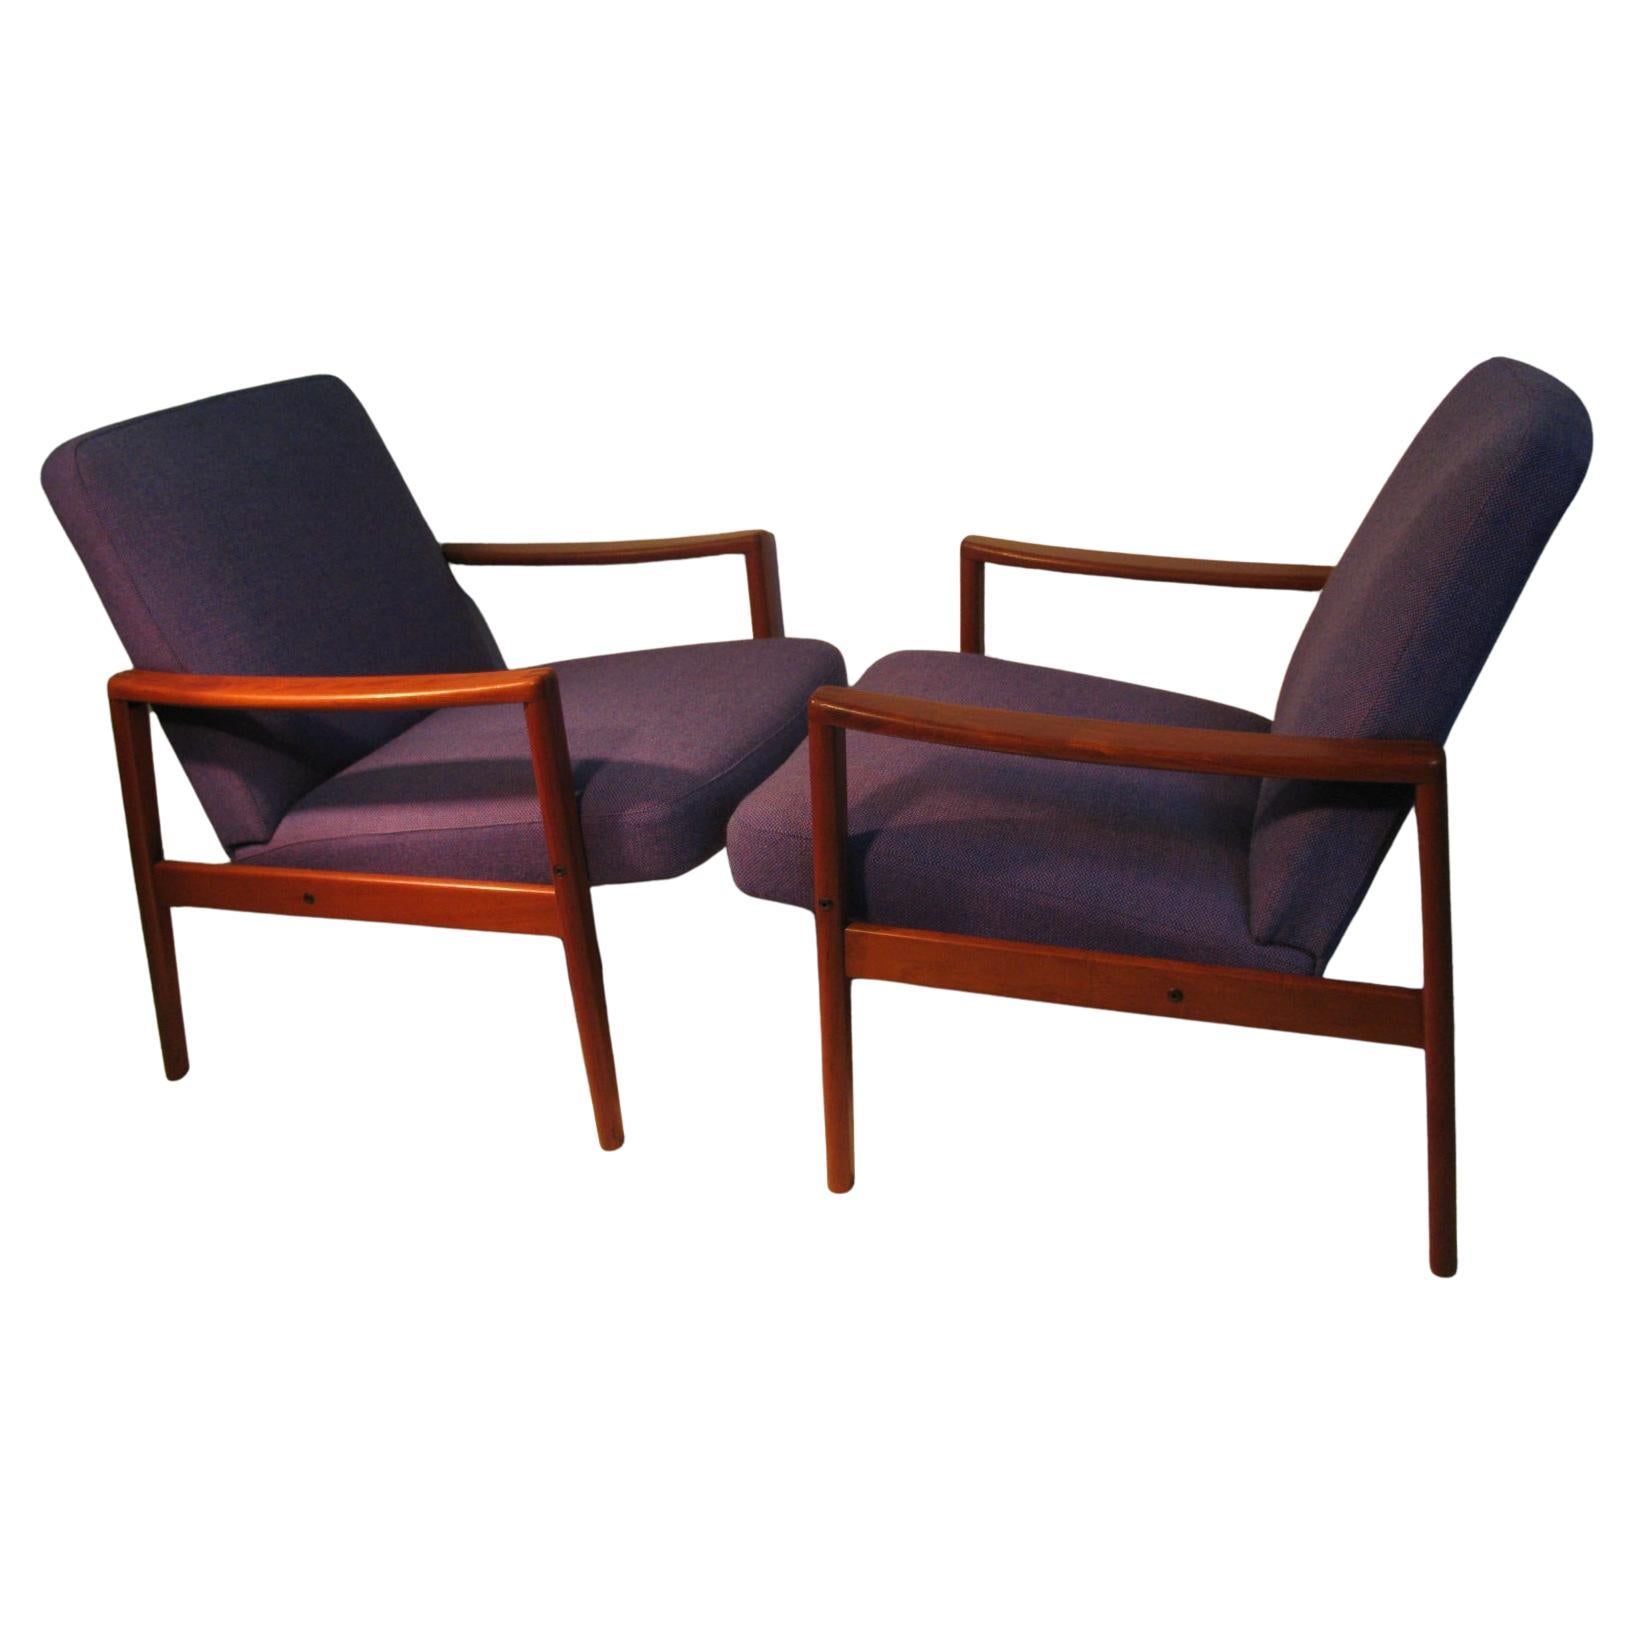 Fabulous pair of upholstered and very comfortable lounge chairs by Ulferts. Dovetailed joinery on the arms. In very good condition, upholstery is also in very good condition. Tagged on bottom. Color is a deep blue.